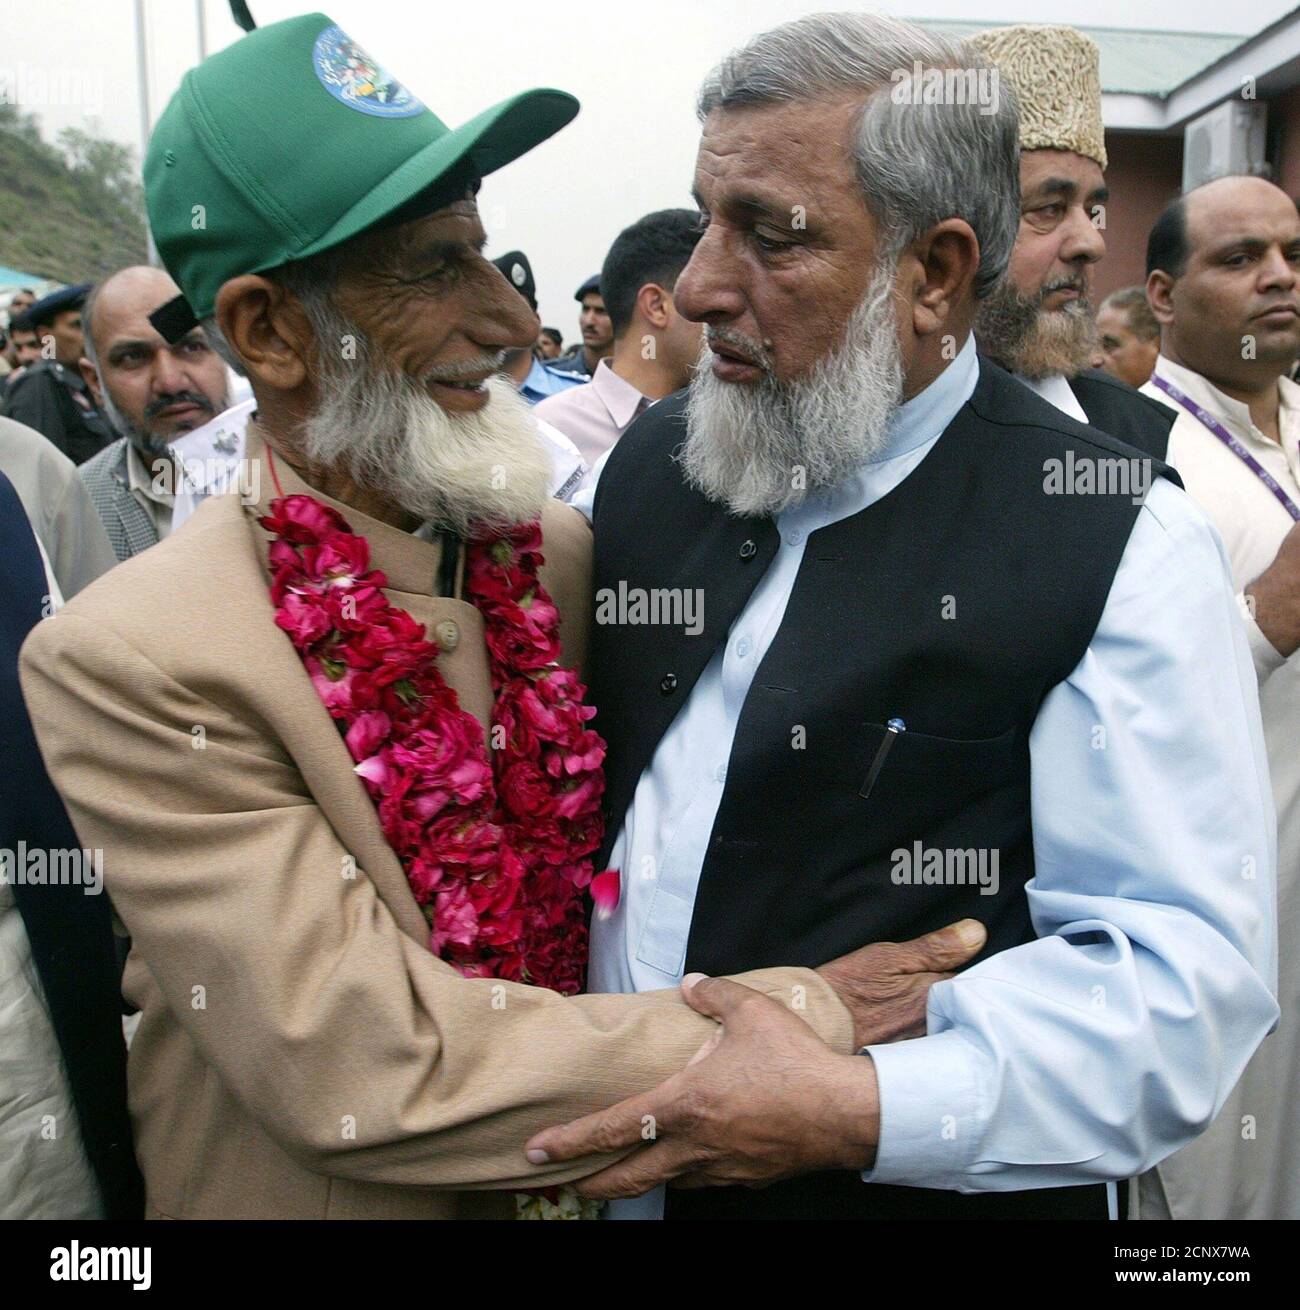 An Indian Kashmiri is hugged by his Pakistani relative upon arrival at the Pakistani border near the 'Peace Bridge' in Chakothi.  An Indian Kashmiri (R) is hugged by his Pakistani relative upon arrival at the Pakistani border near the 'Peace Bridge' in Chakothi, on the Line of Control, about 58km (36 miles) south of Muzaffarabad in Kashmir April 7, 2005. Showered with tears and rose petals from relatives thought lost, two groups of Indian and Pakistani Kashmiris walked over the 'Peace Bridge' on Thursday, breaking through a military line that has divided them and their land with blood for almo Stock Photo